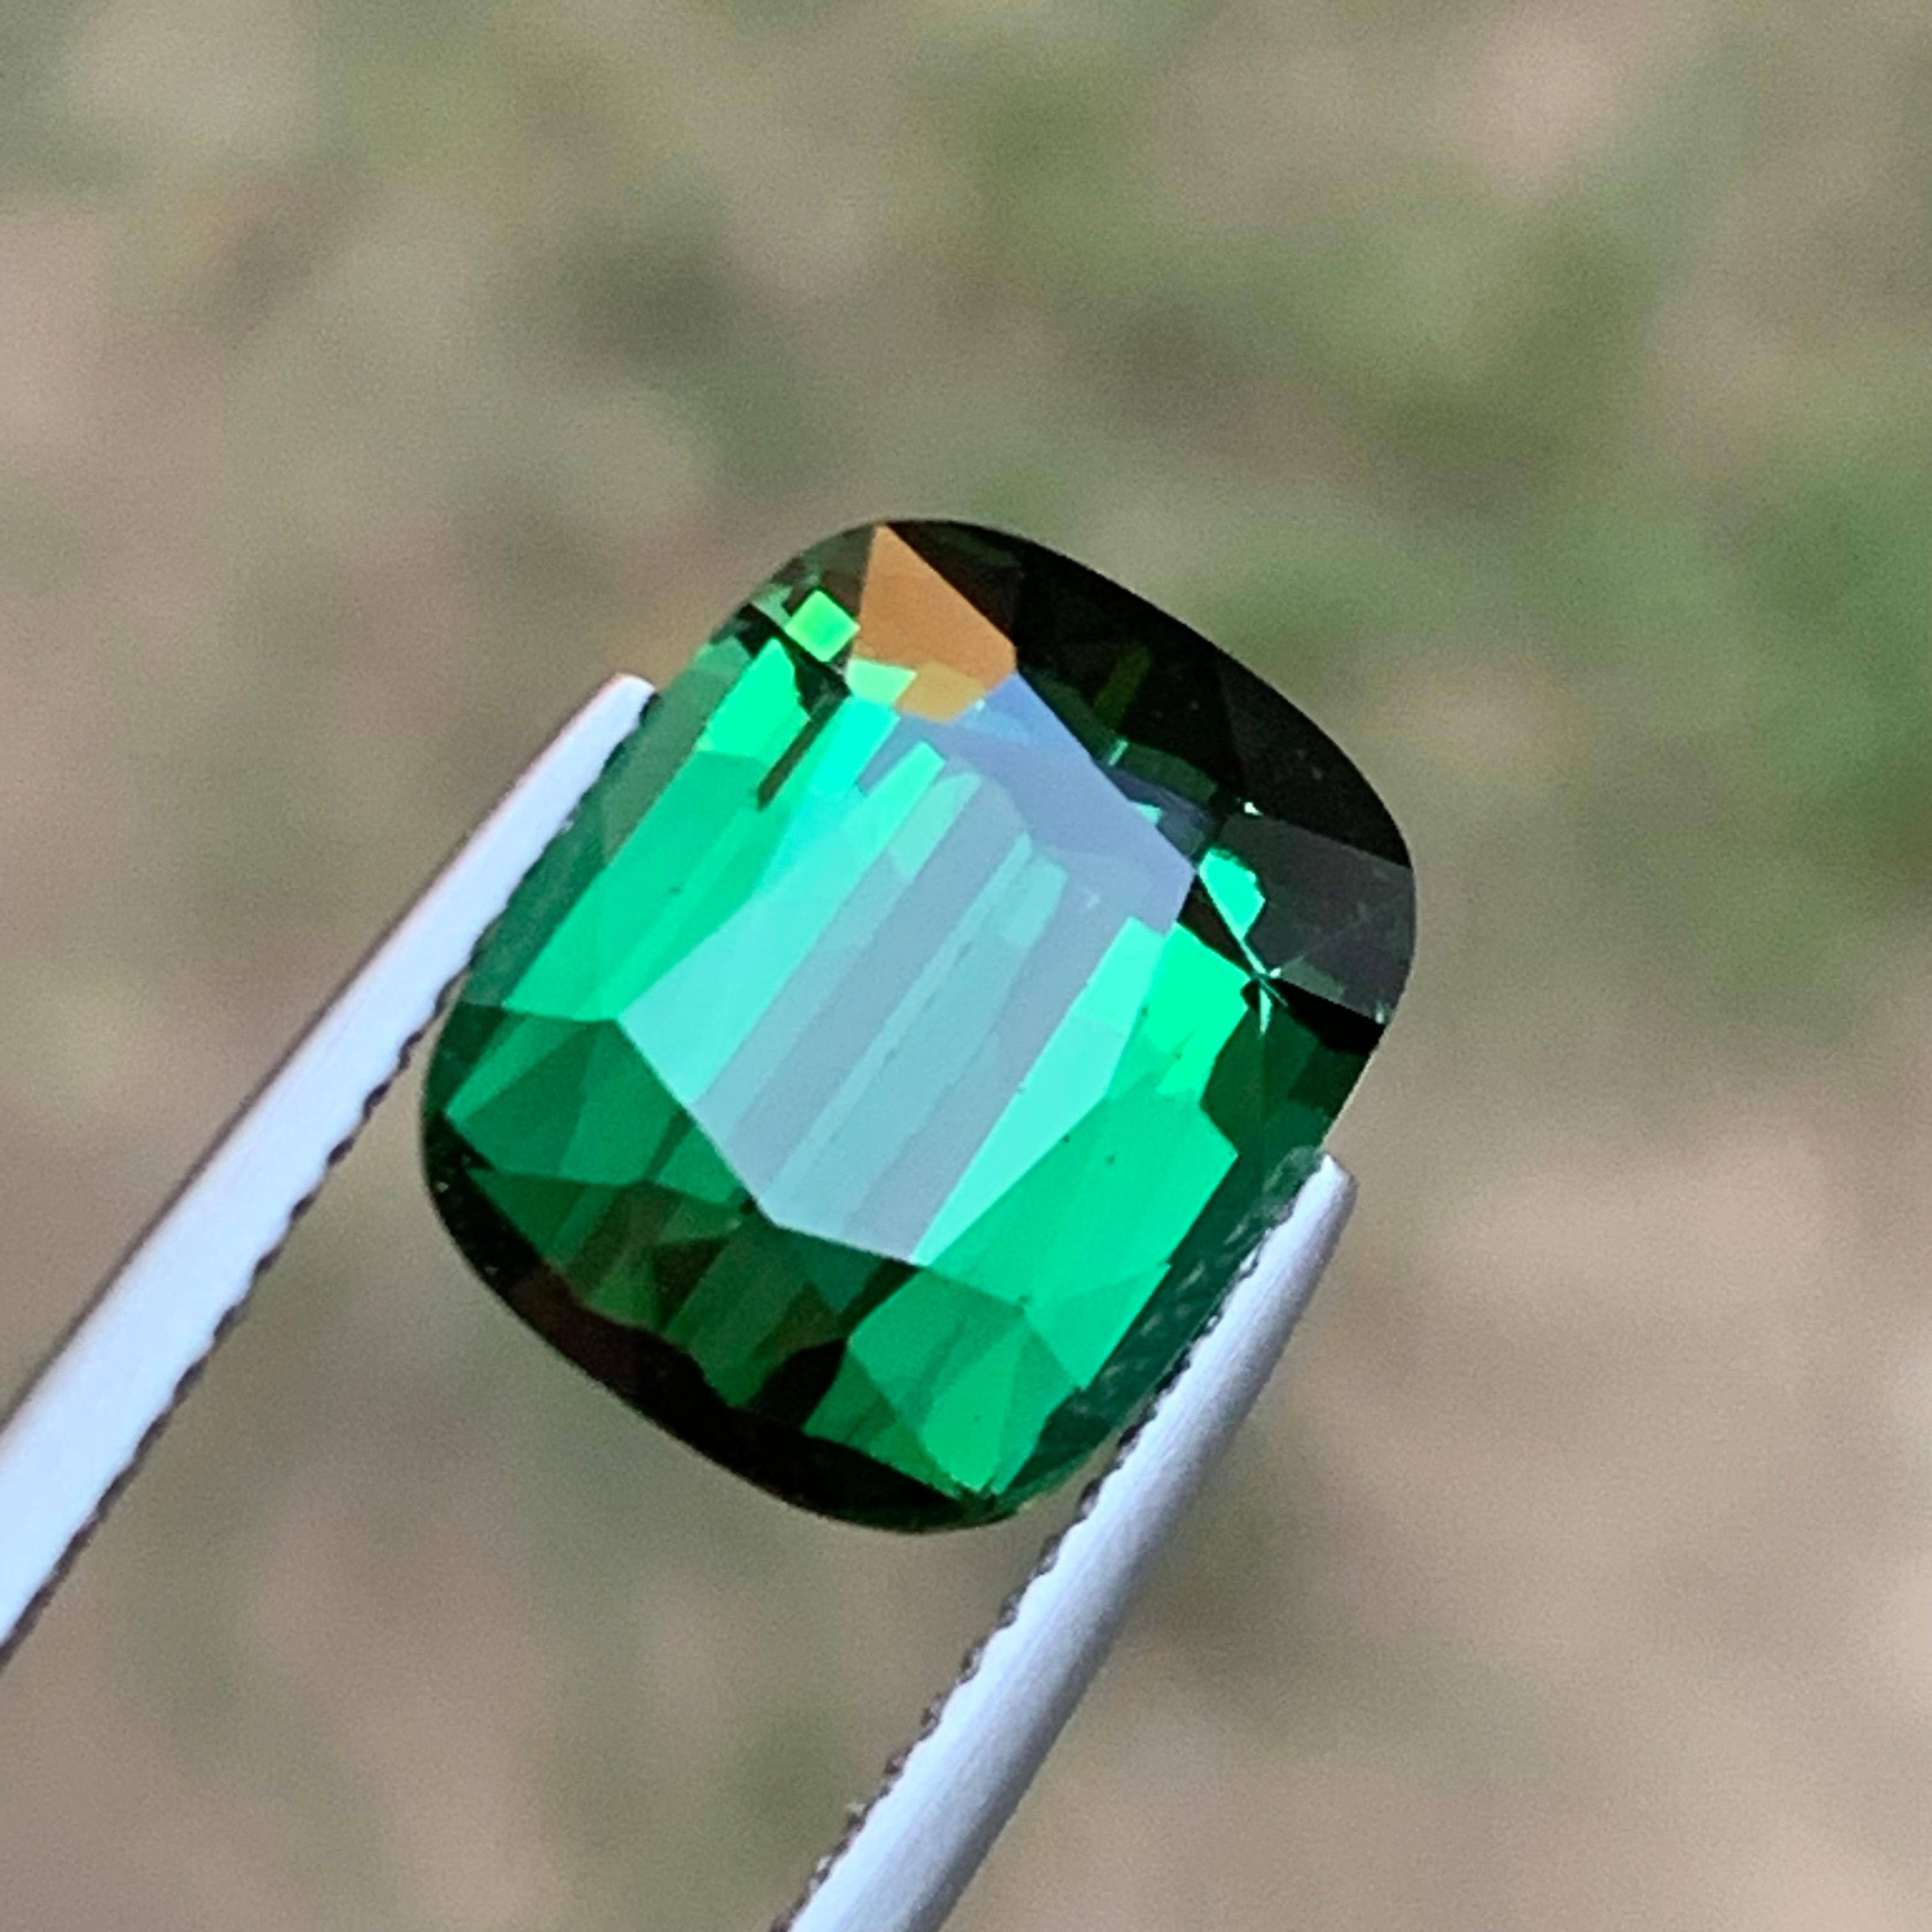 Contemporary Rare Green Natural Tourmaline Gemstone, 7.65 Ct Cushion Cut for a Ring/Pendant For Sale